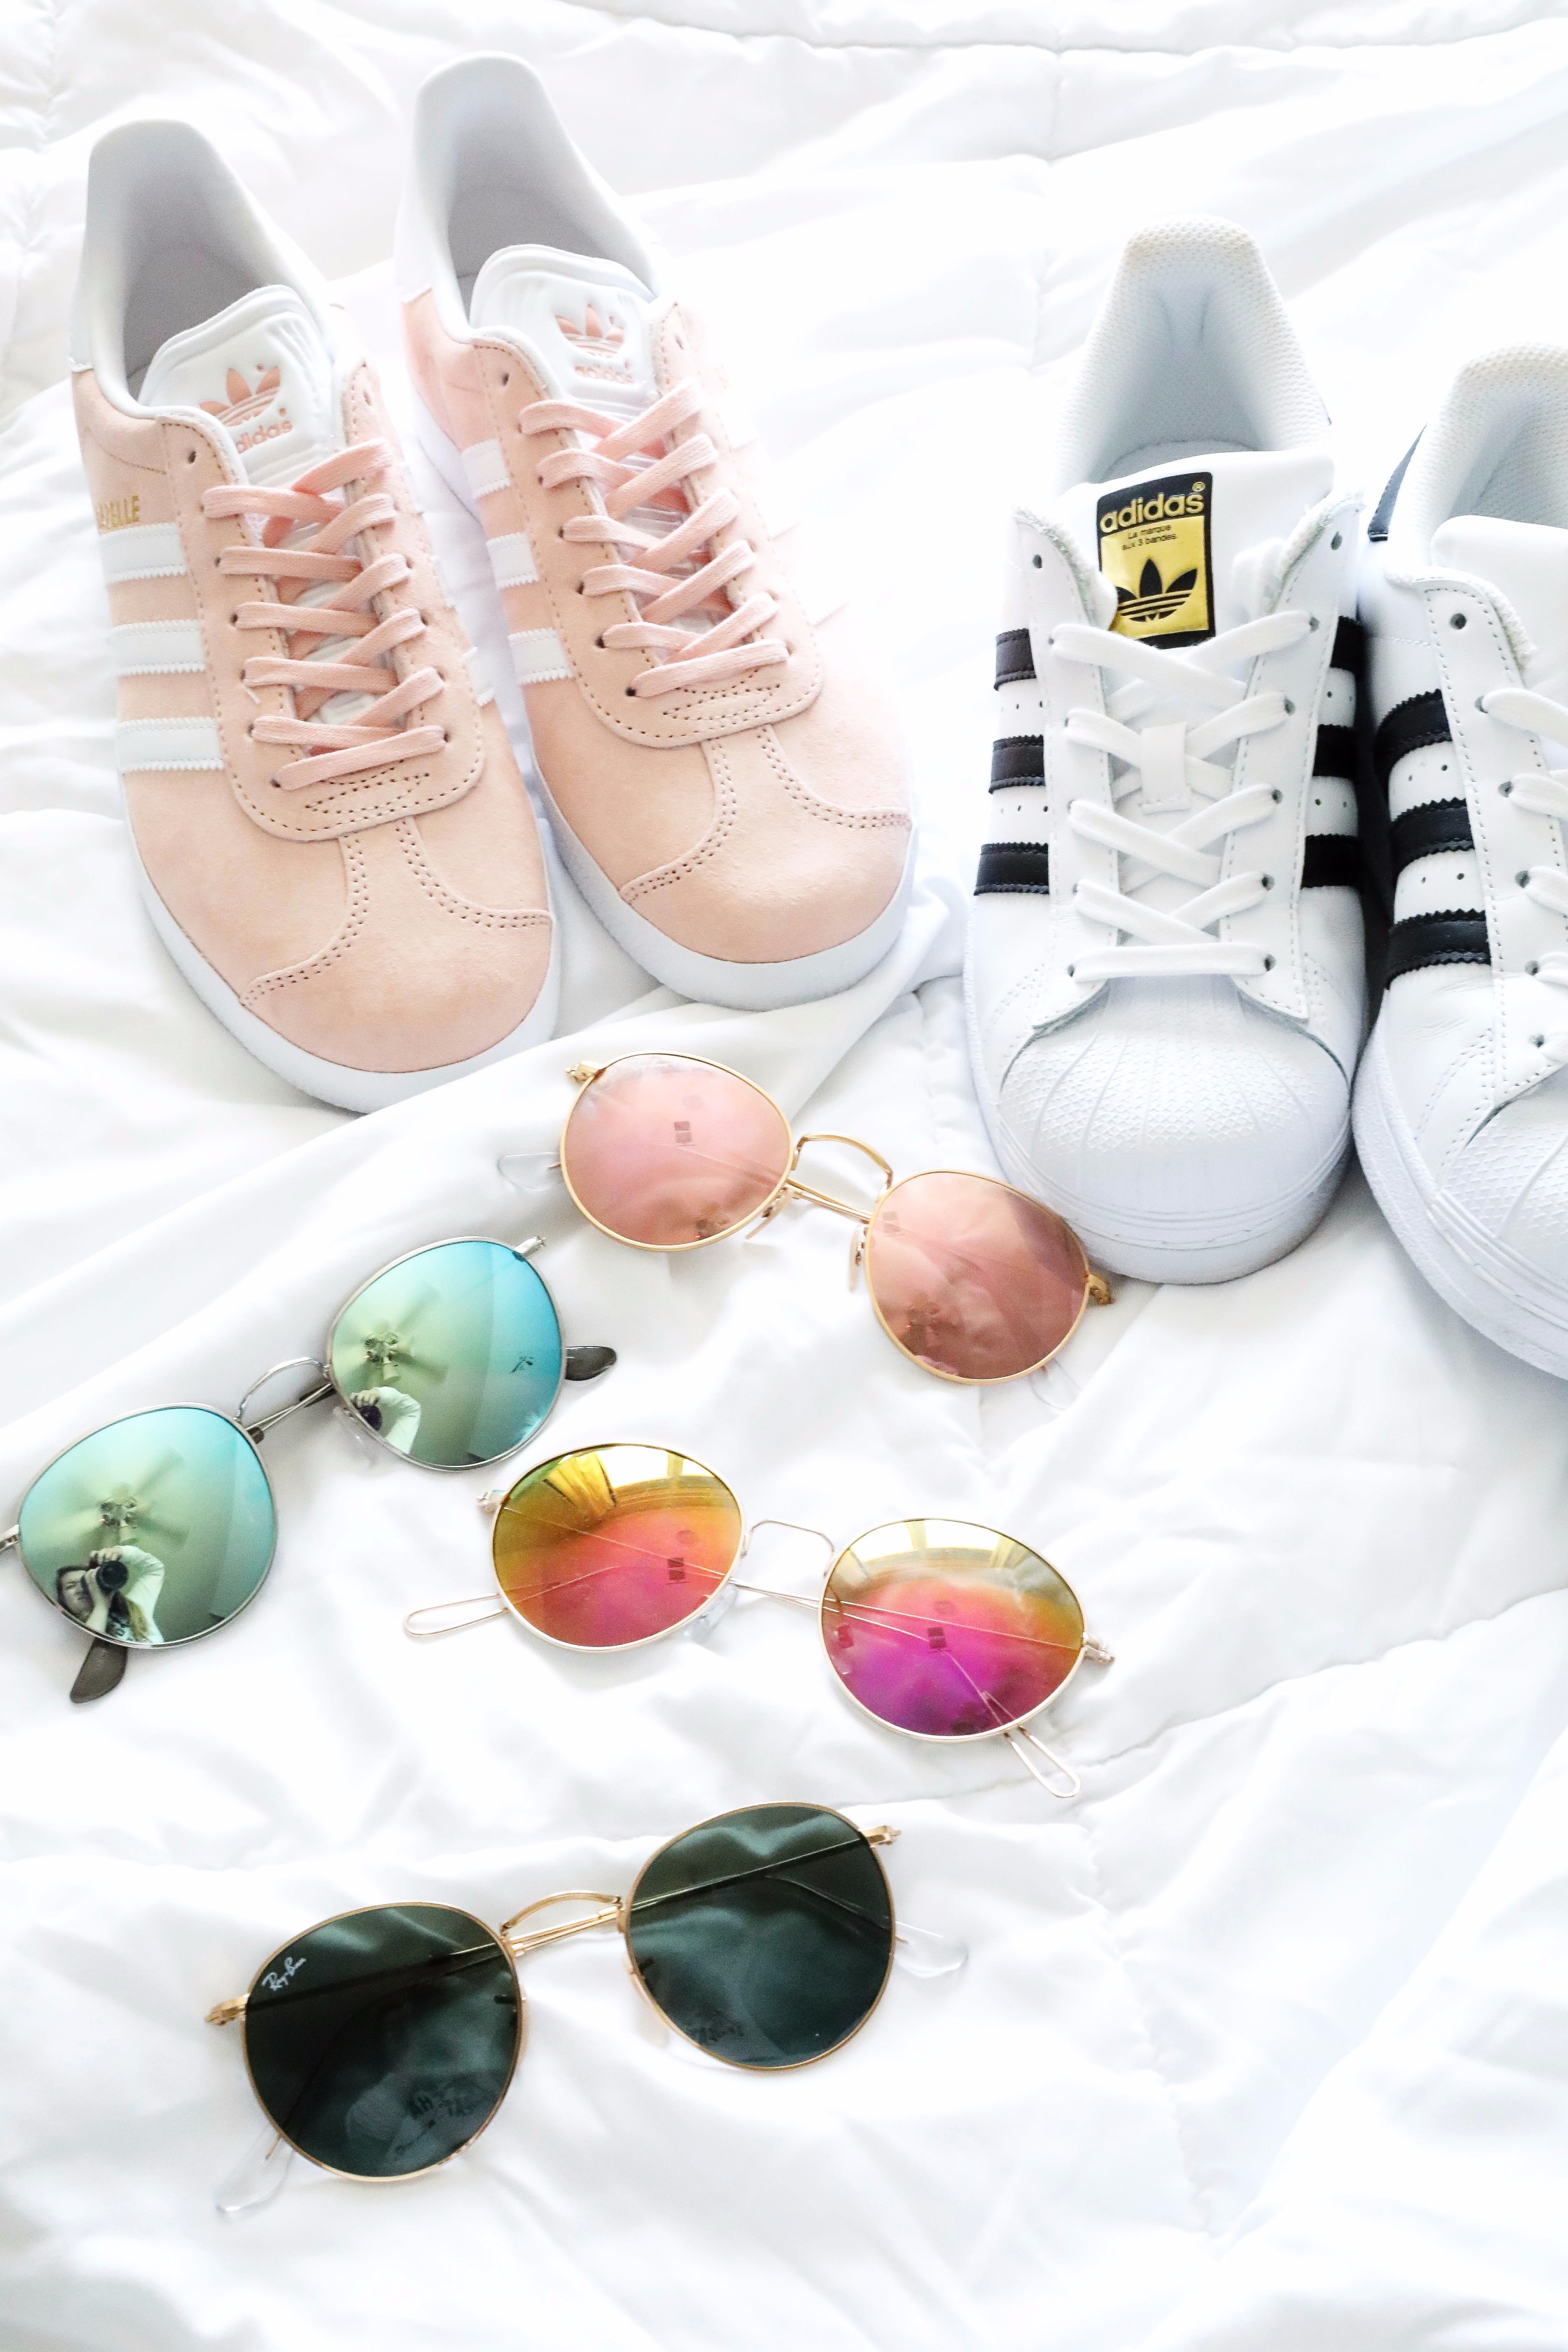 Sunglasses pink Adidas sneakers and my puppy June favorites by fashion and lifestyle blogger lauren lindmark on daily dose of charm